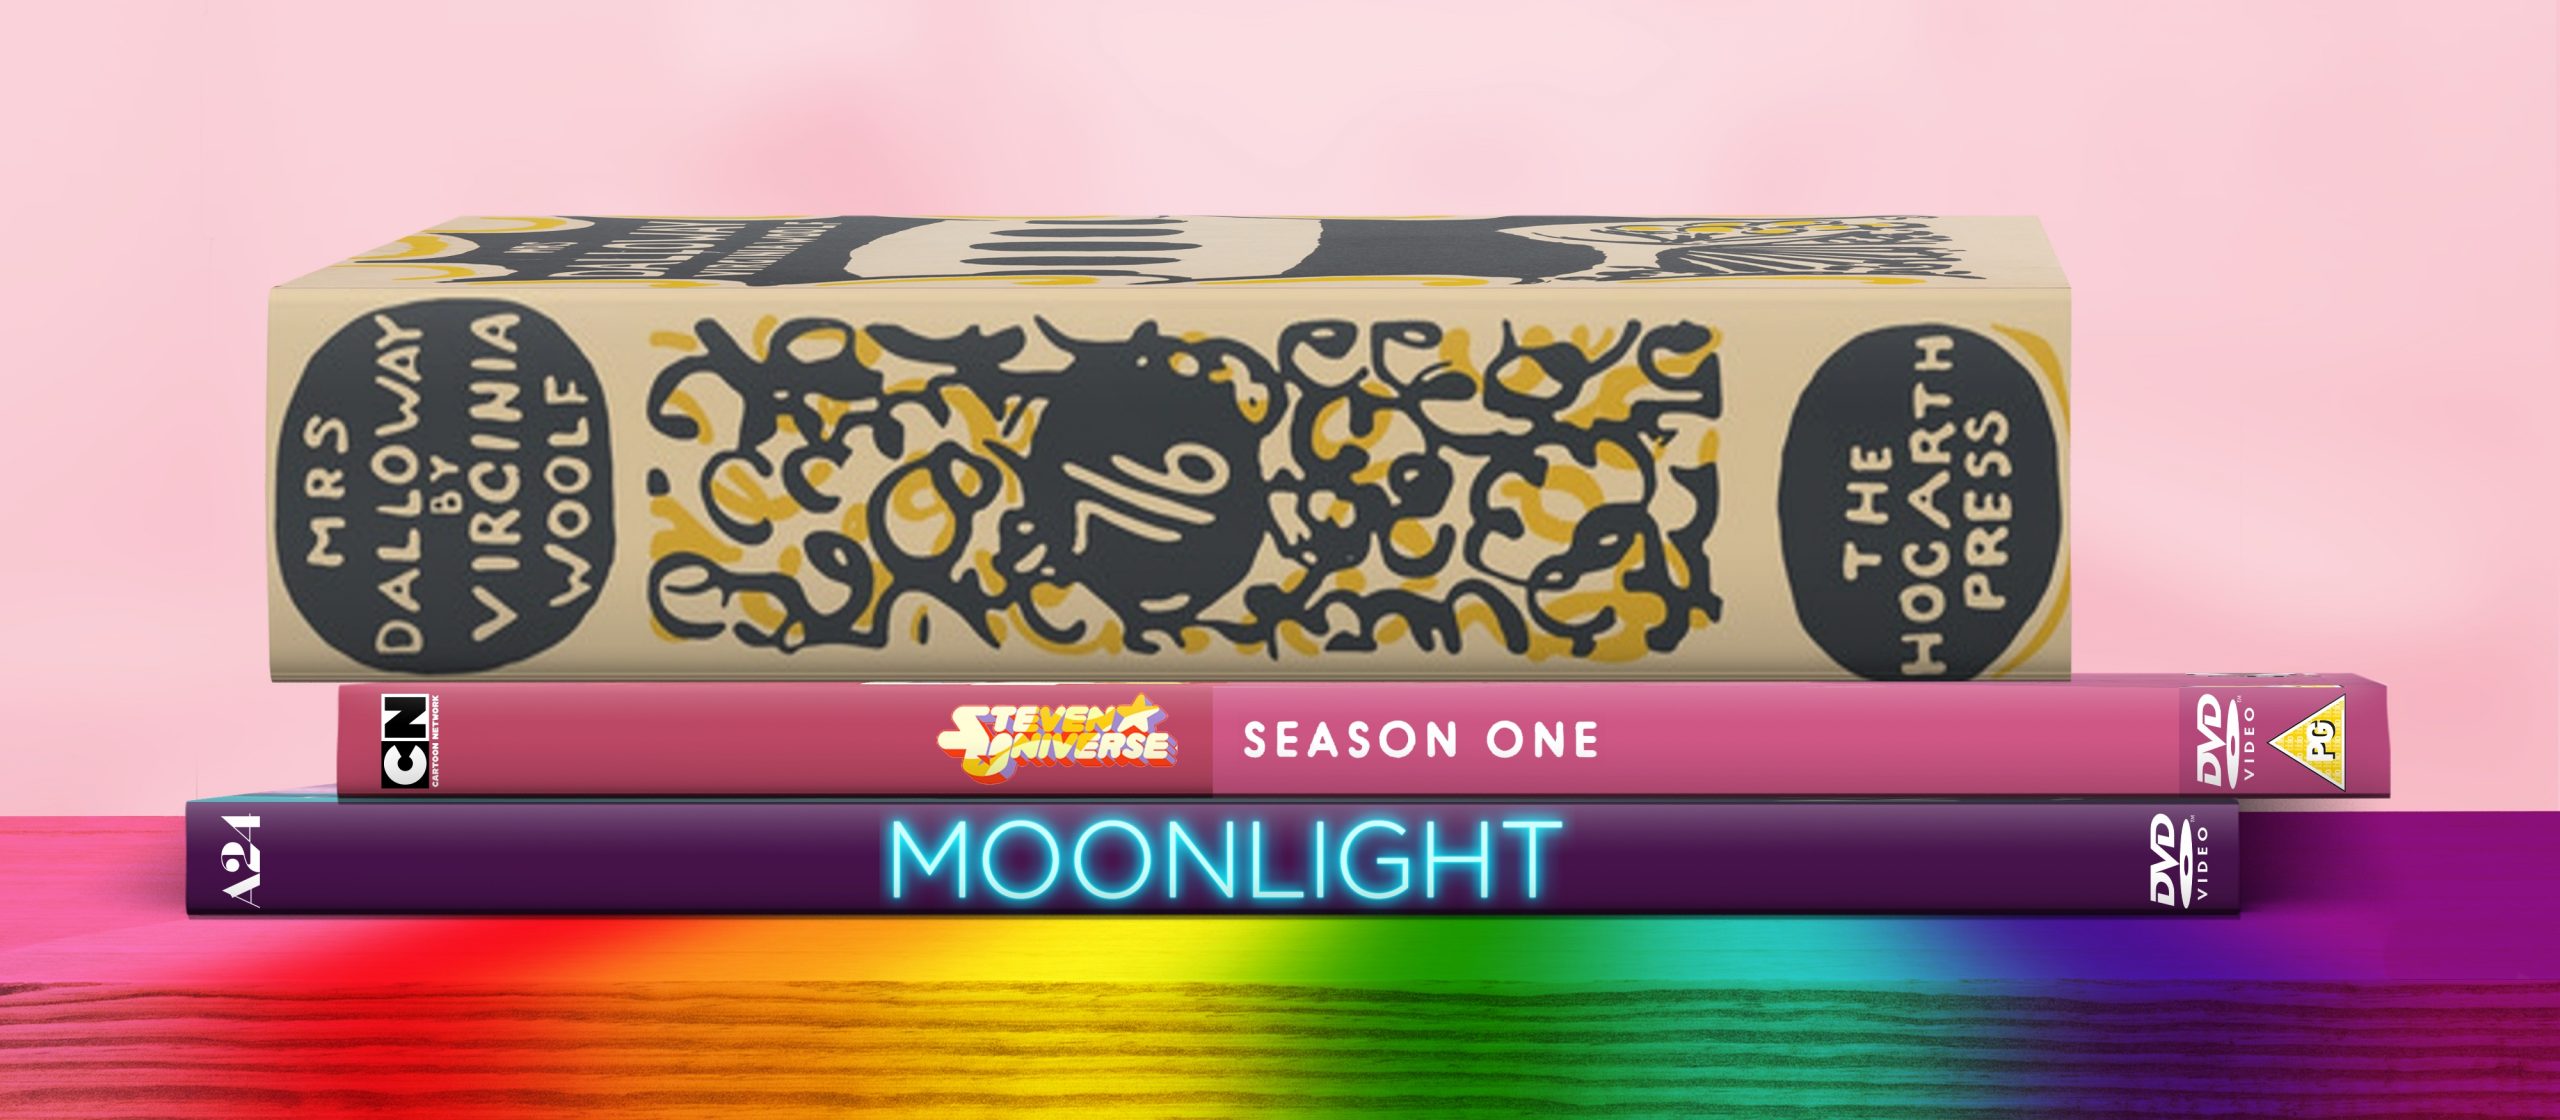 mockup of books and DVD cases stacked on a rainbow table in front of a pink wall. the media includes mrs. dalloway by virginia woolf, steven universe season one, and moonlight